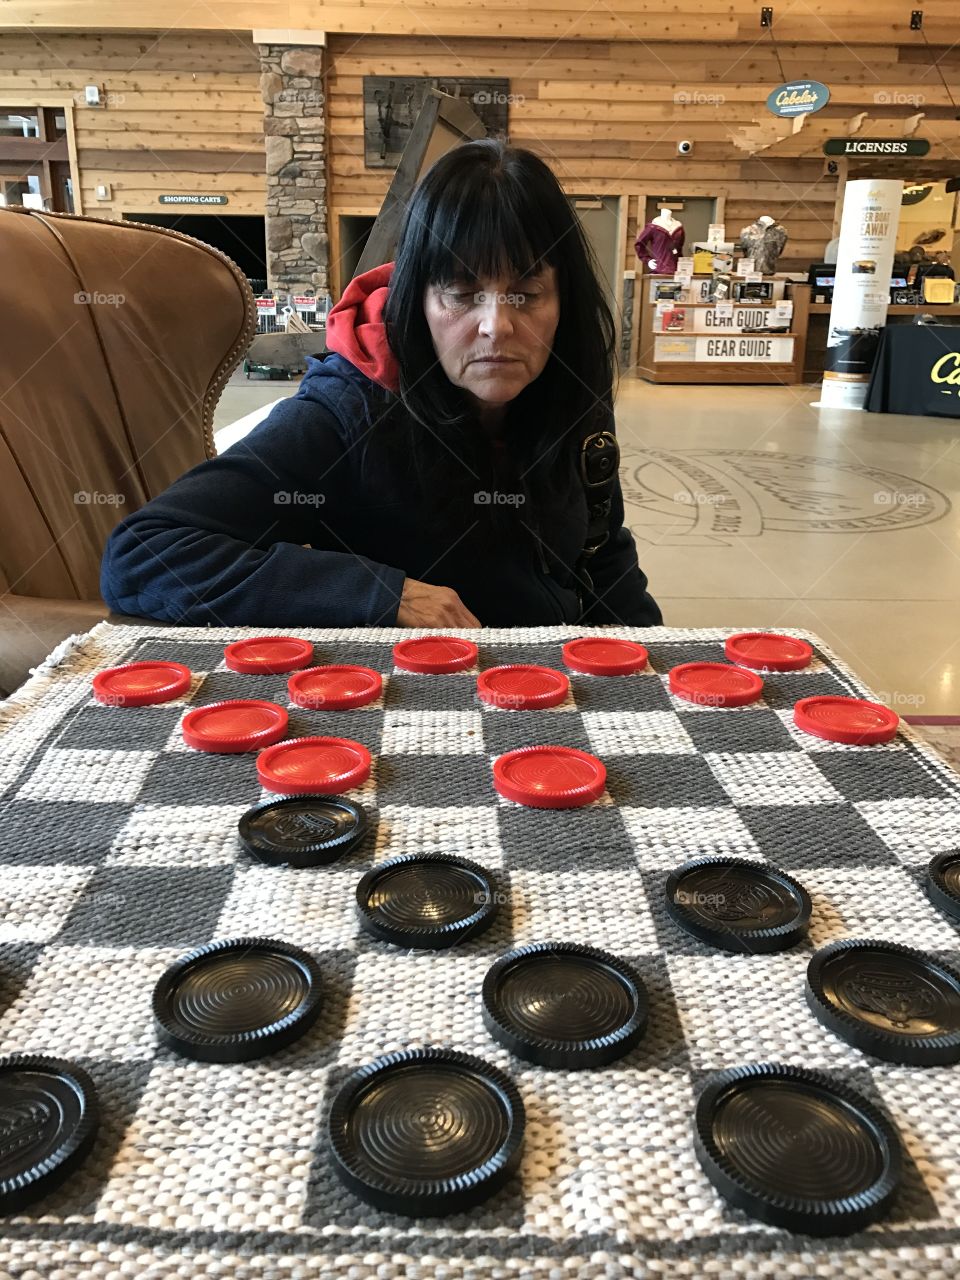 Playing a mean game of checkers 